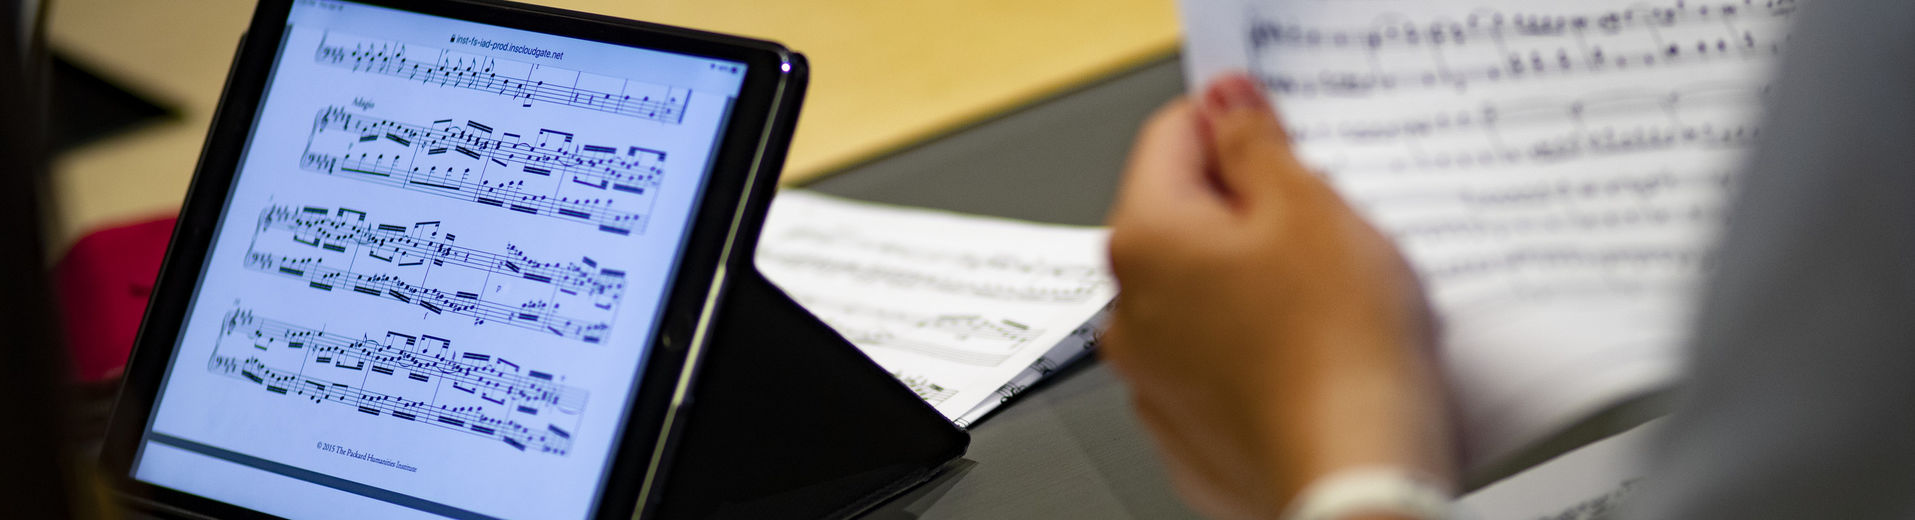 One student looks at a music score on a tablet while another student holds a paper score.